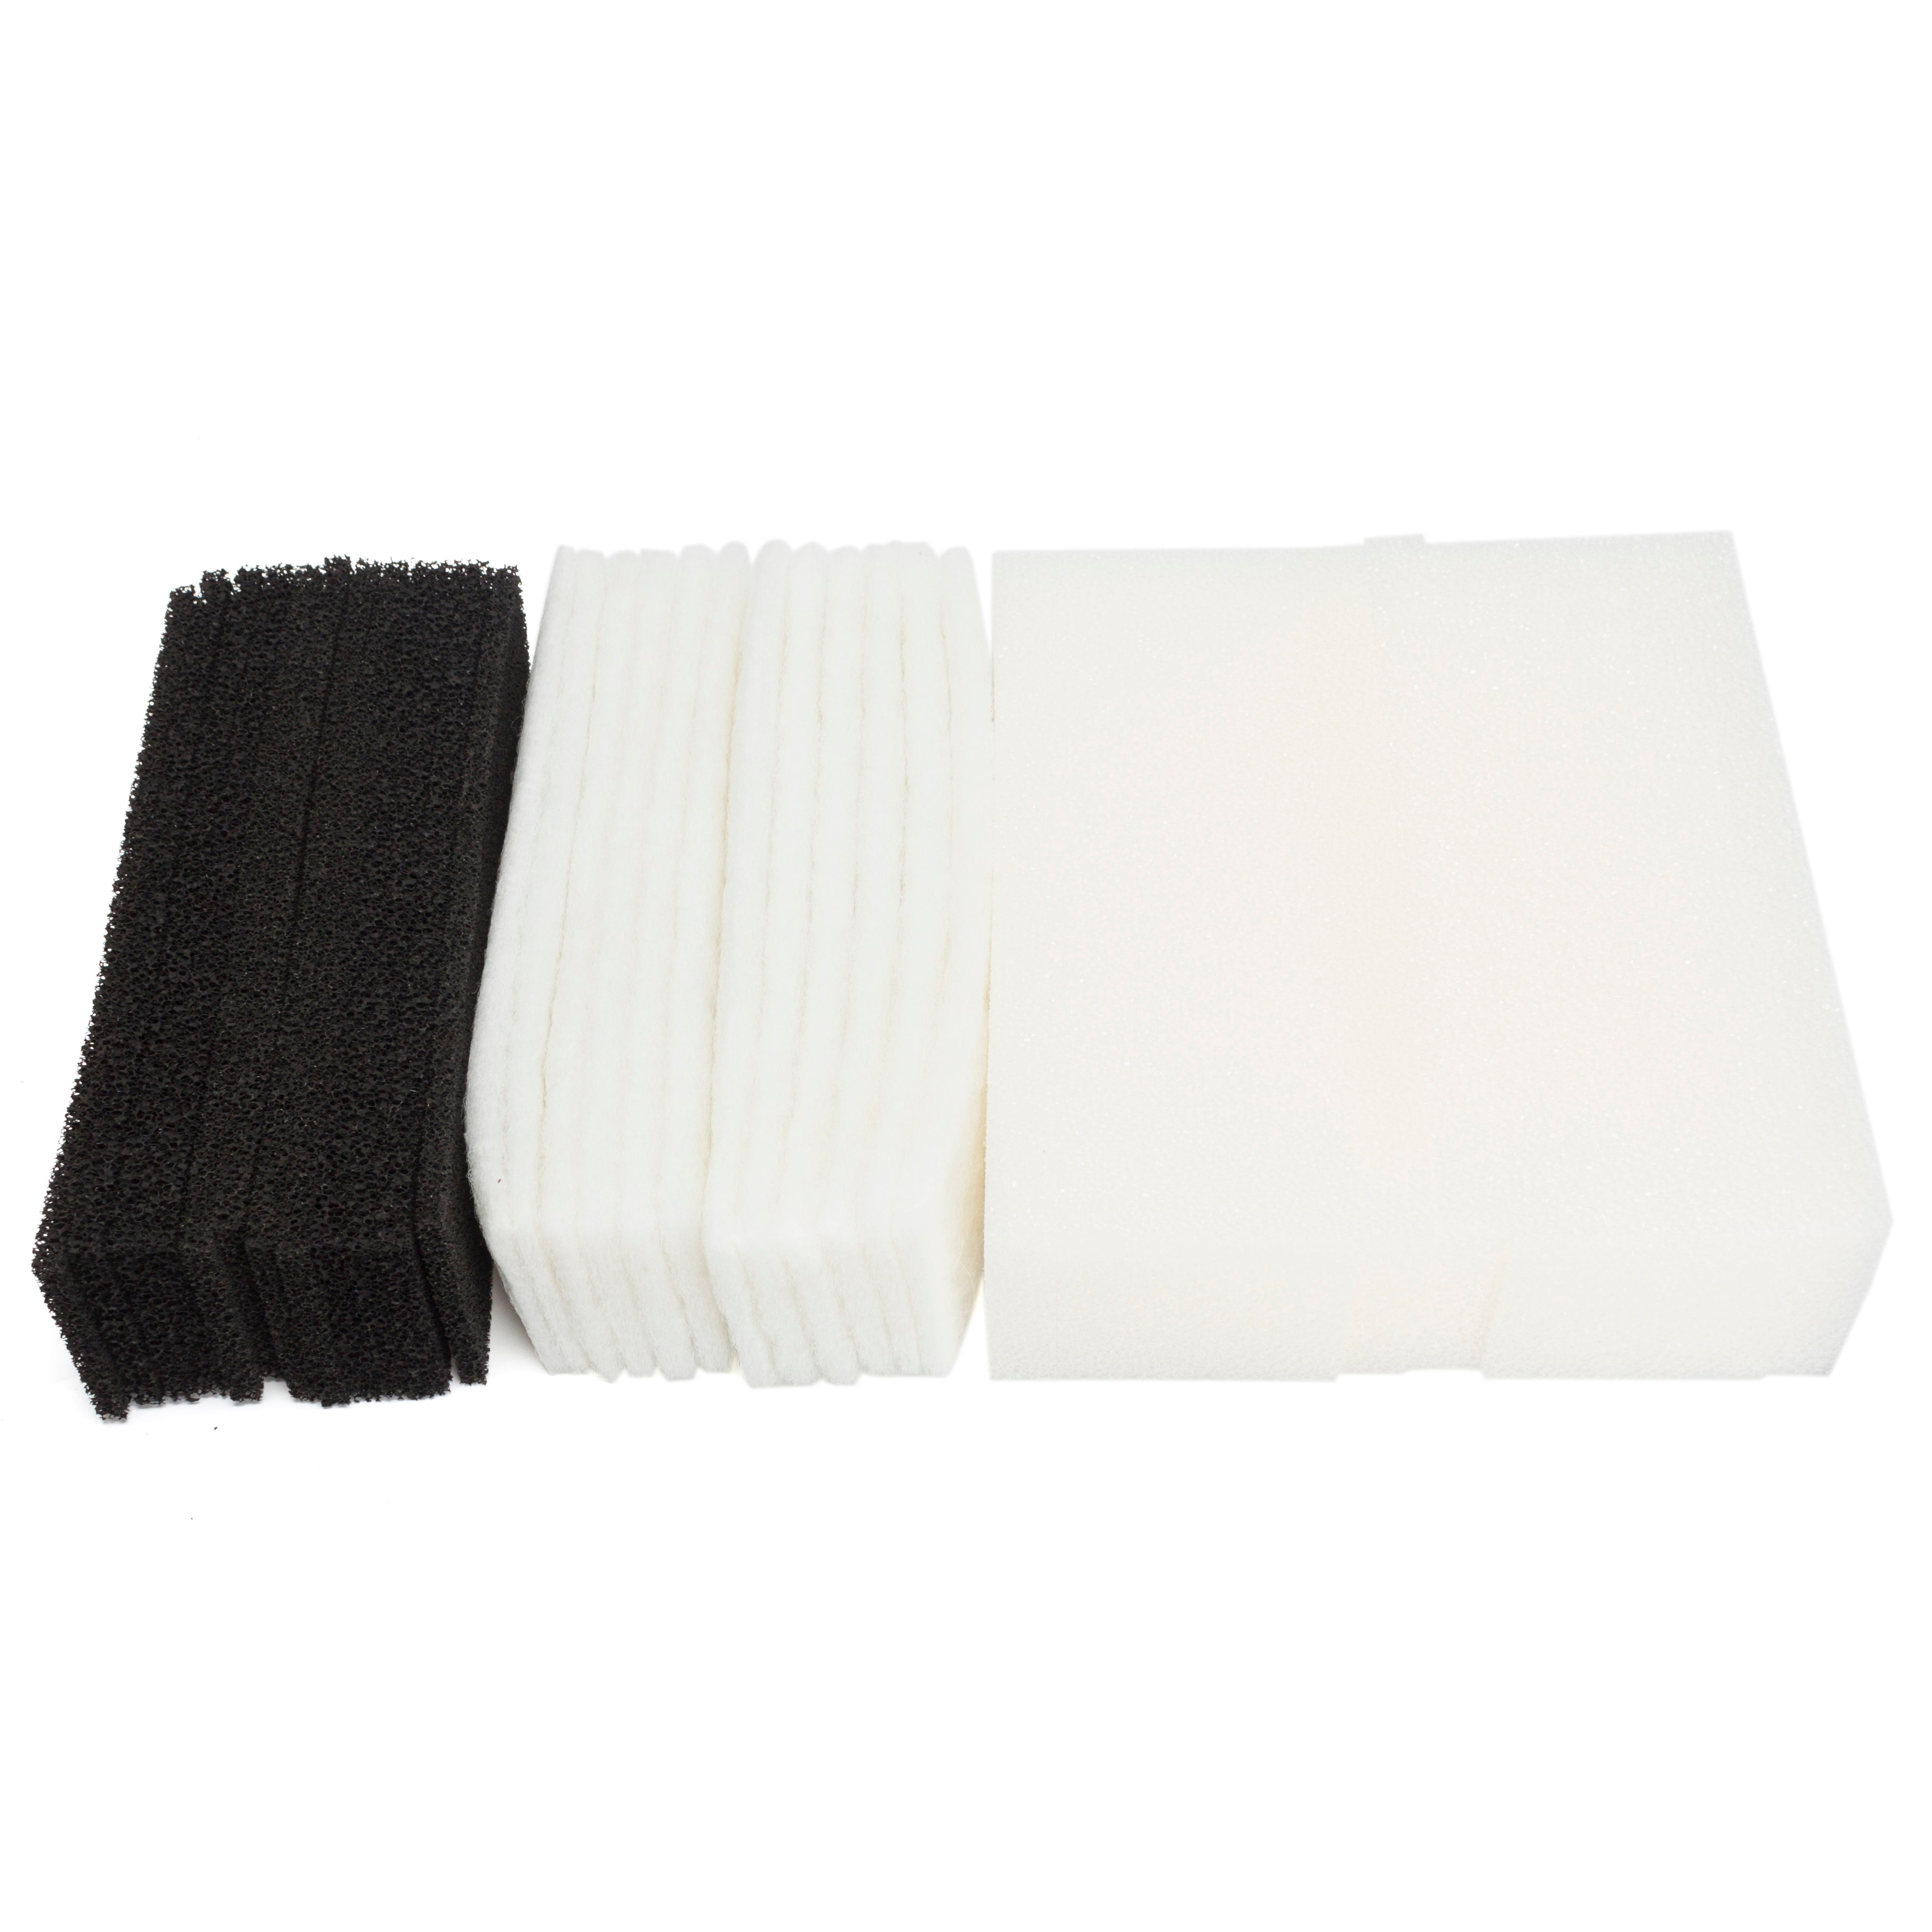 LTWHOME Value Pack of Foam Filters, Carbon Filters and Polyester Filters Set Fit for Fluval U4 Filter(Pack of 36)